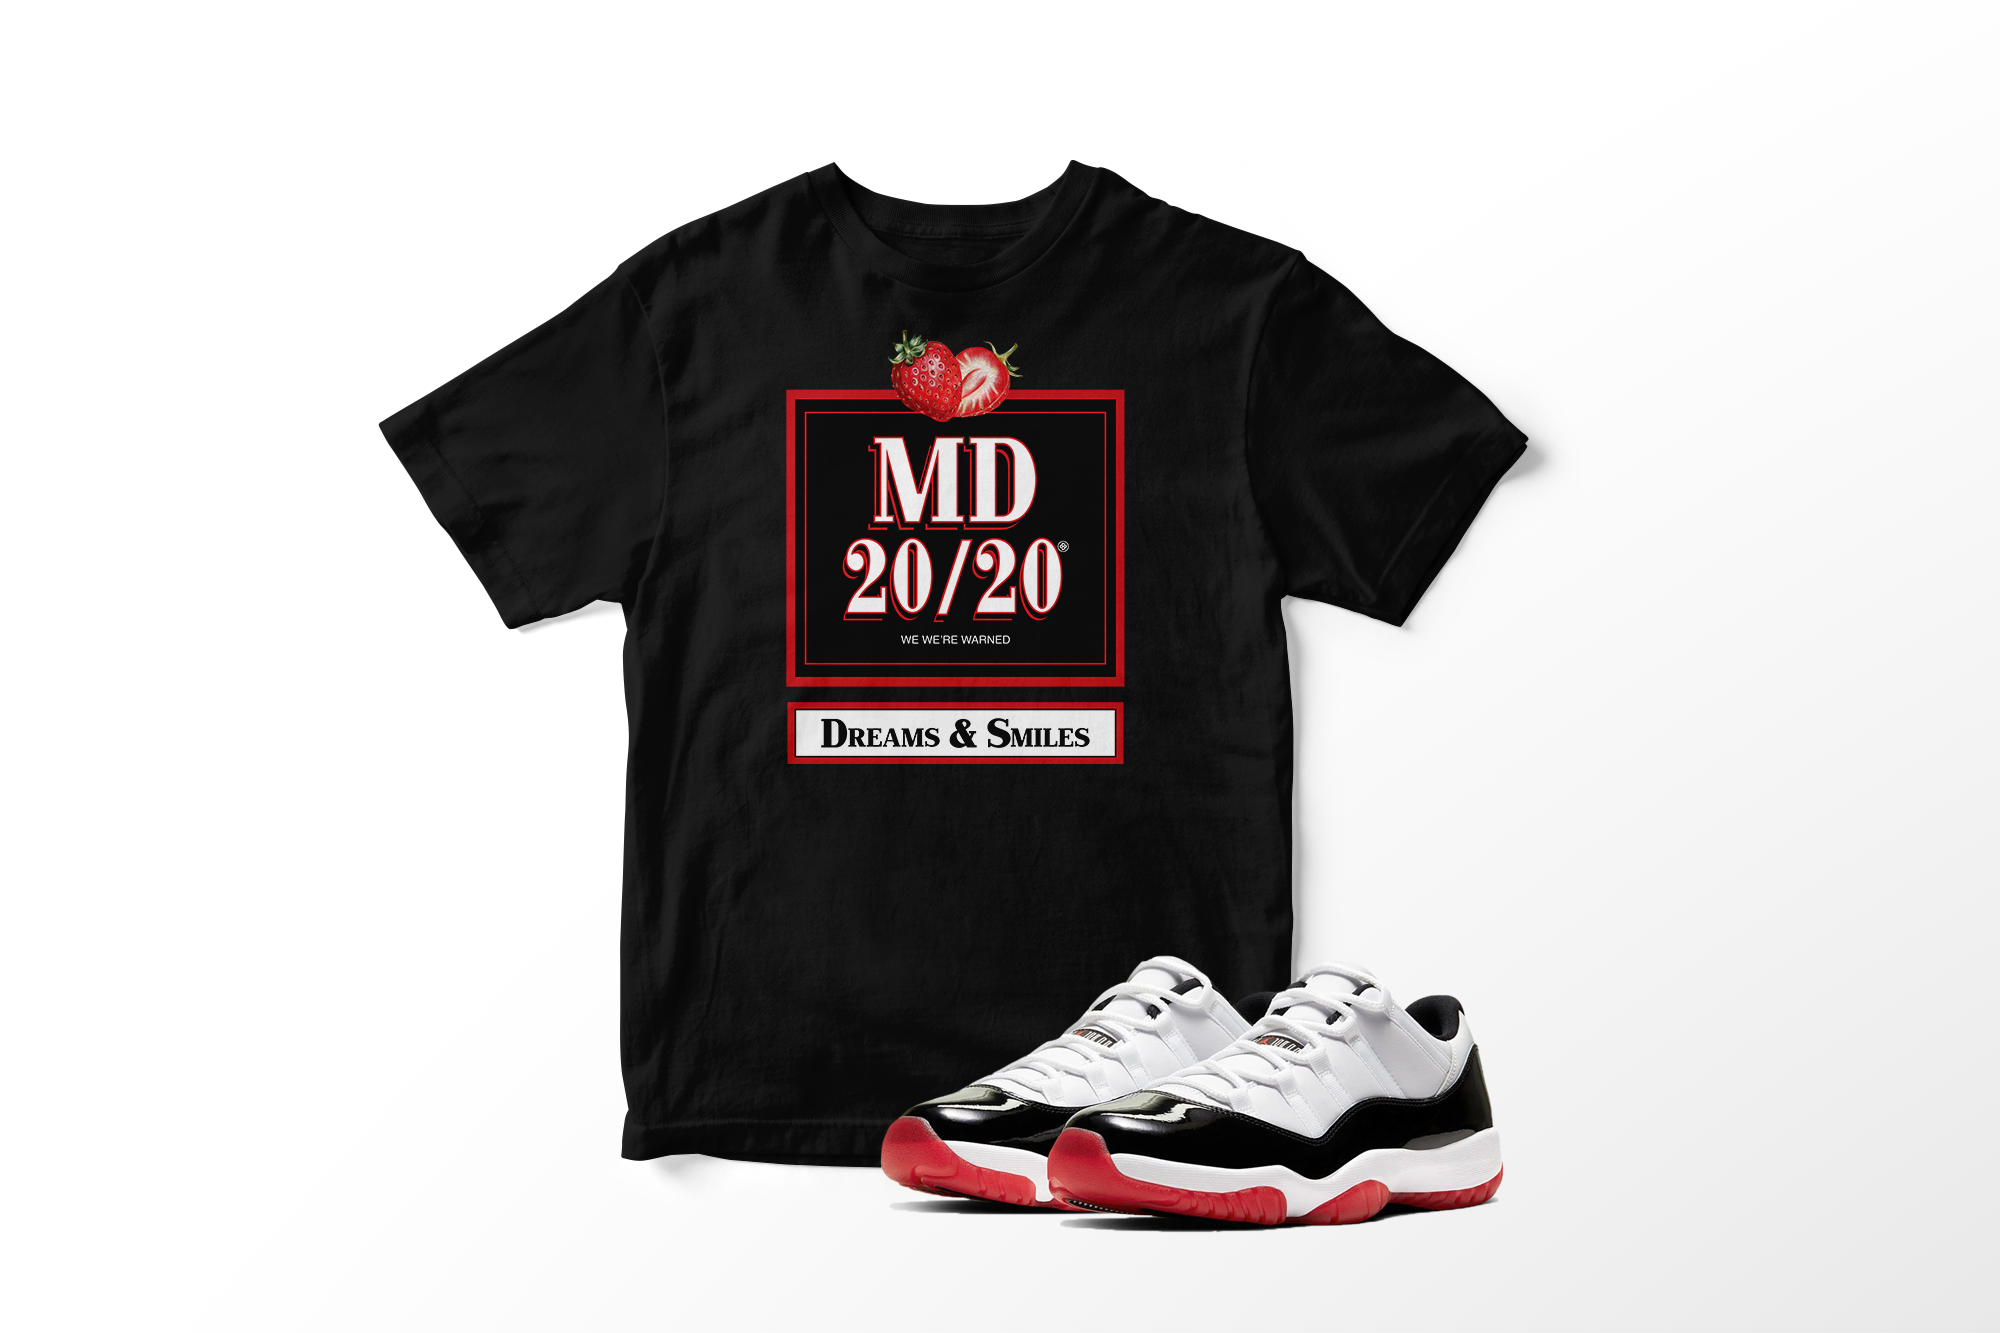 'MD 2020' in Concord Bred CW Short Sleeve Tee